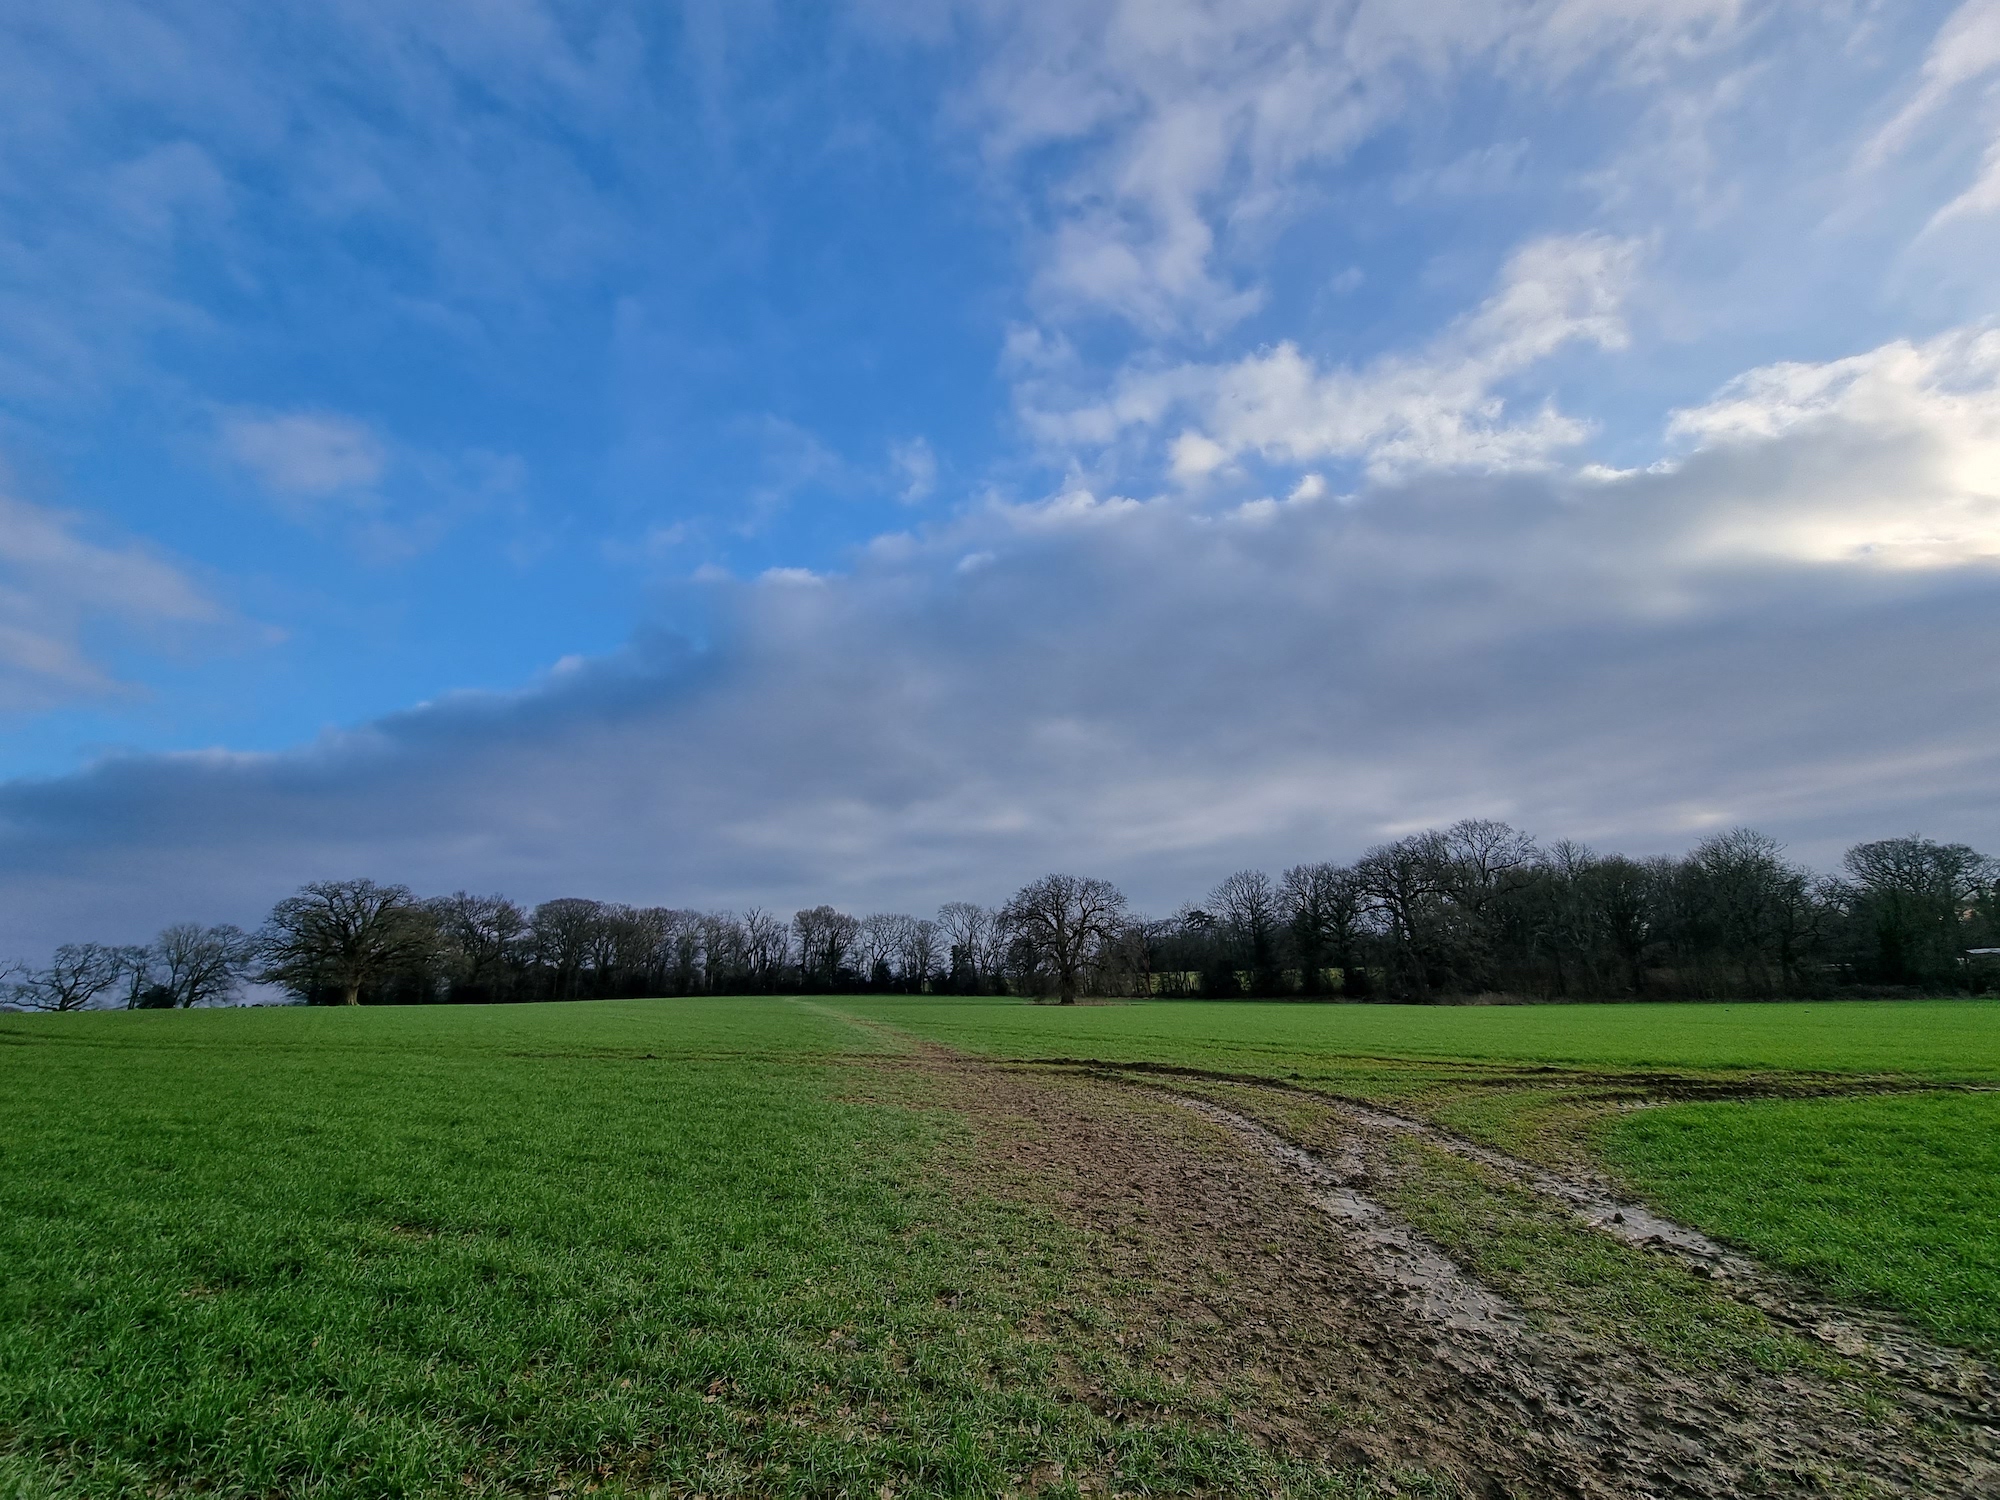 Galaxy S21 Ultra wide-angle photo of a field.